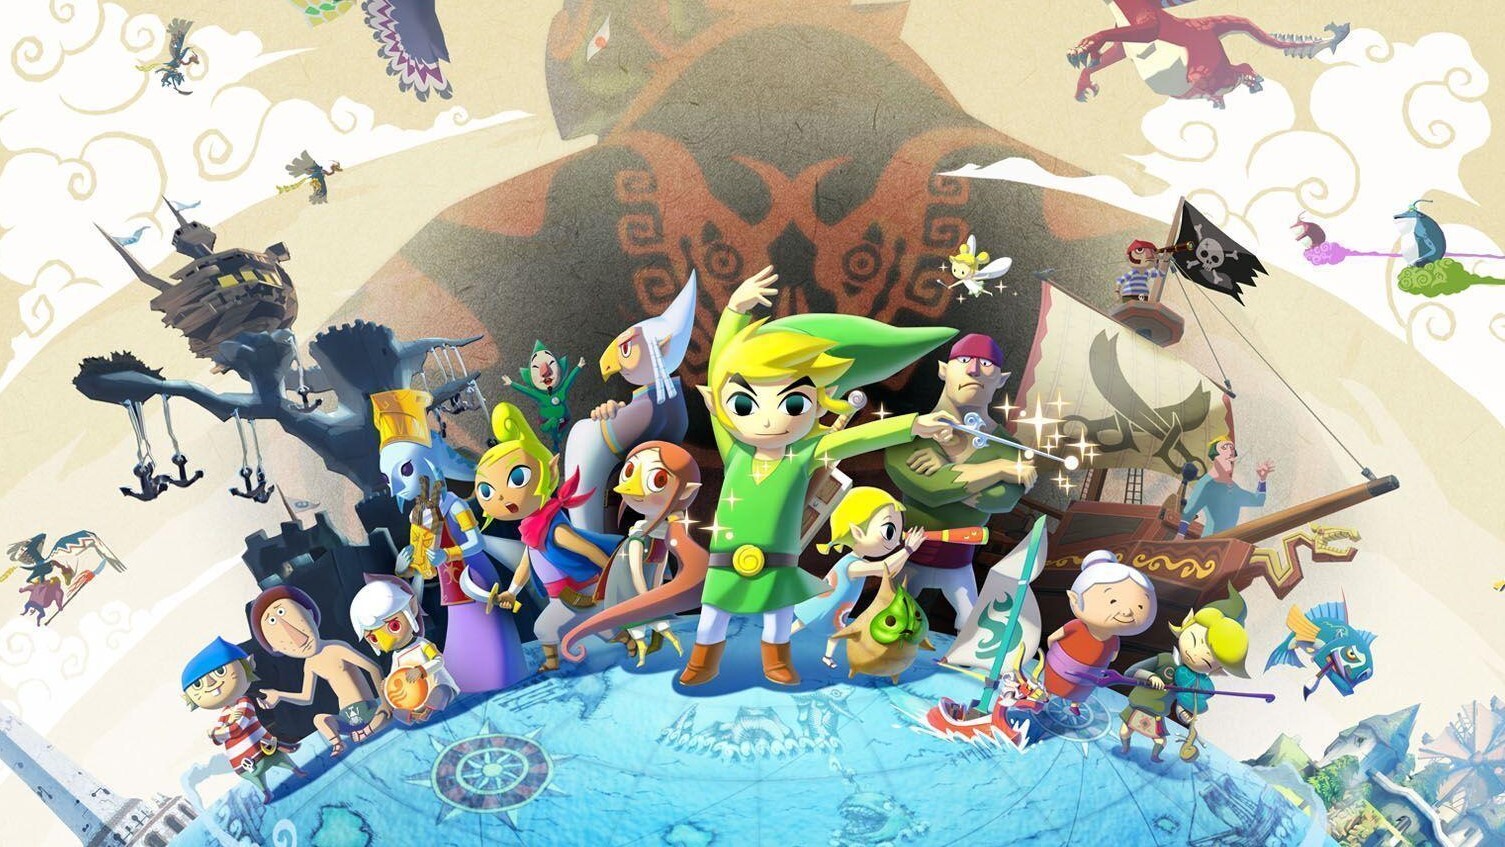 Nintendo Switch: When To Expect A Zelda Wind Waker HD Port?